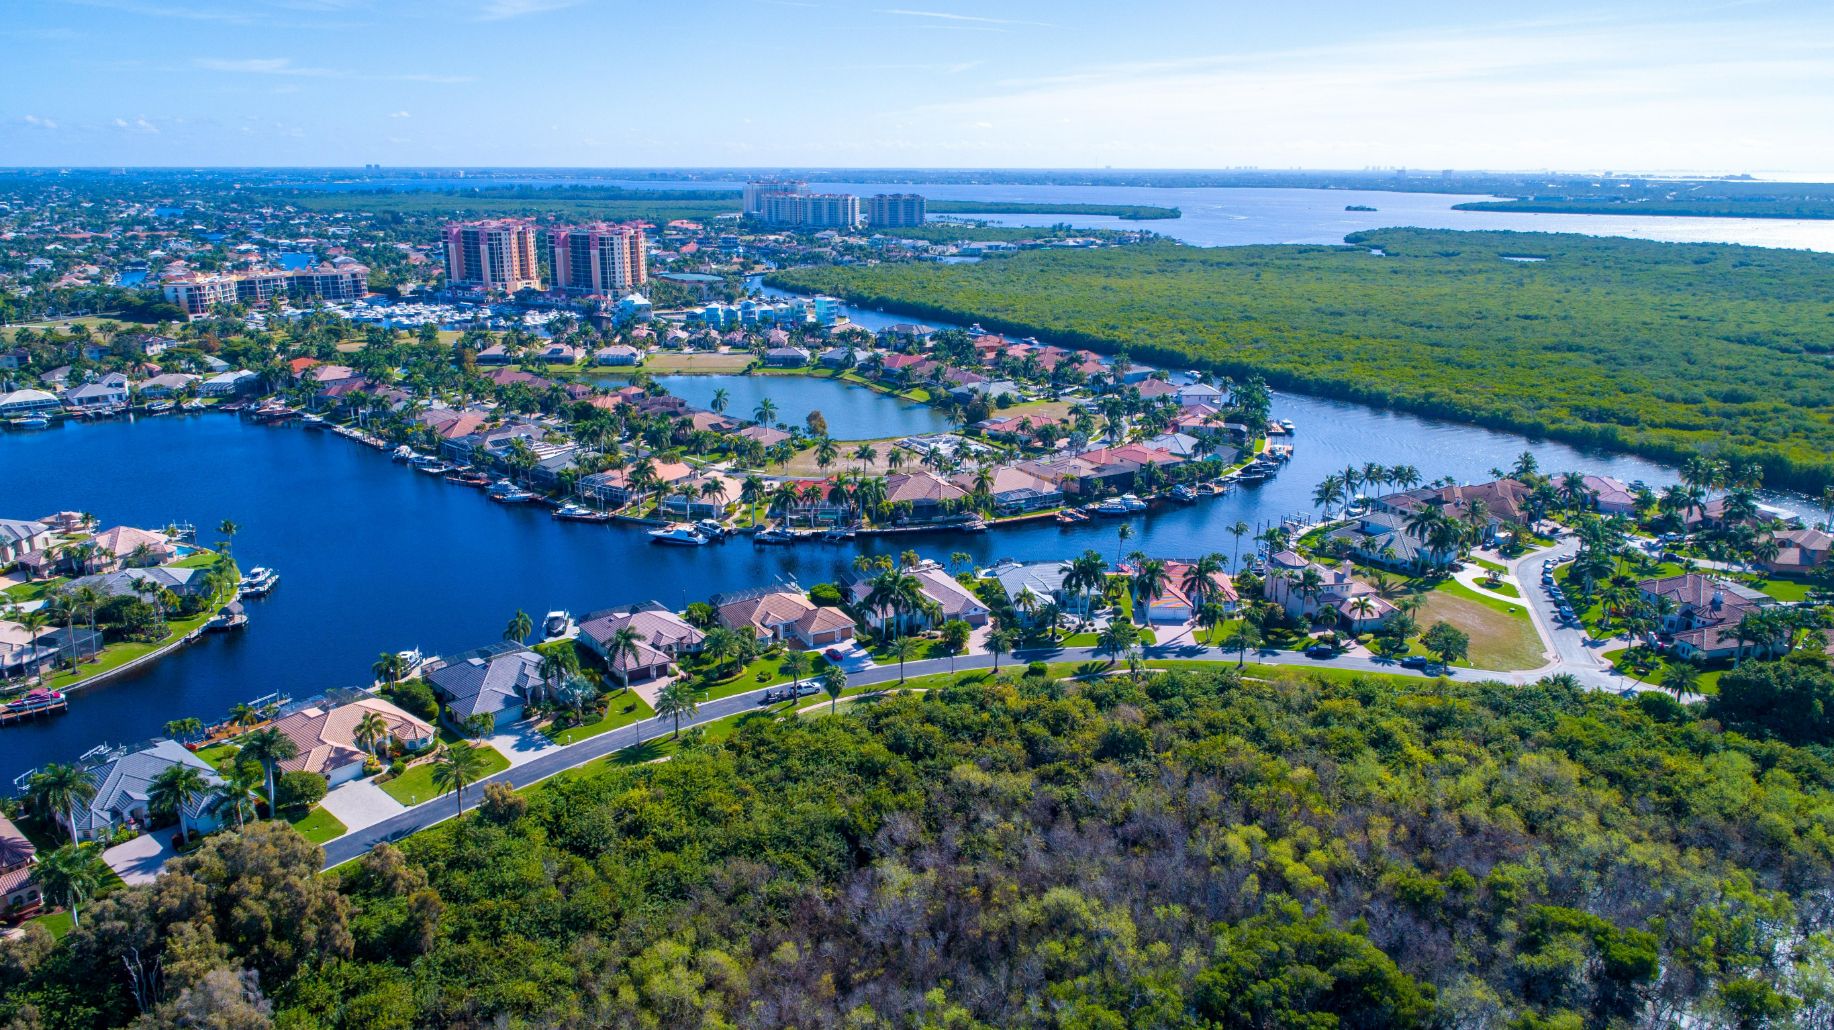 Aerial Drone View of Bay in Cape Coral, Florida with Mangroves and Real Estate in the Foreground and the Caloosahatchee River in the Background